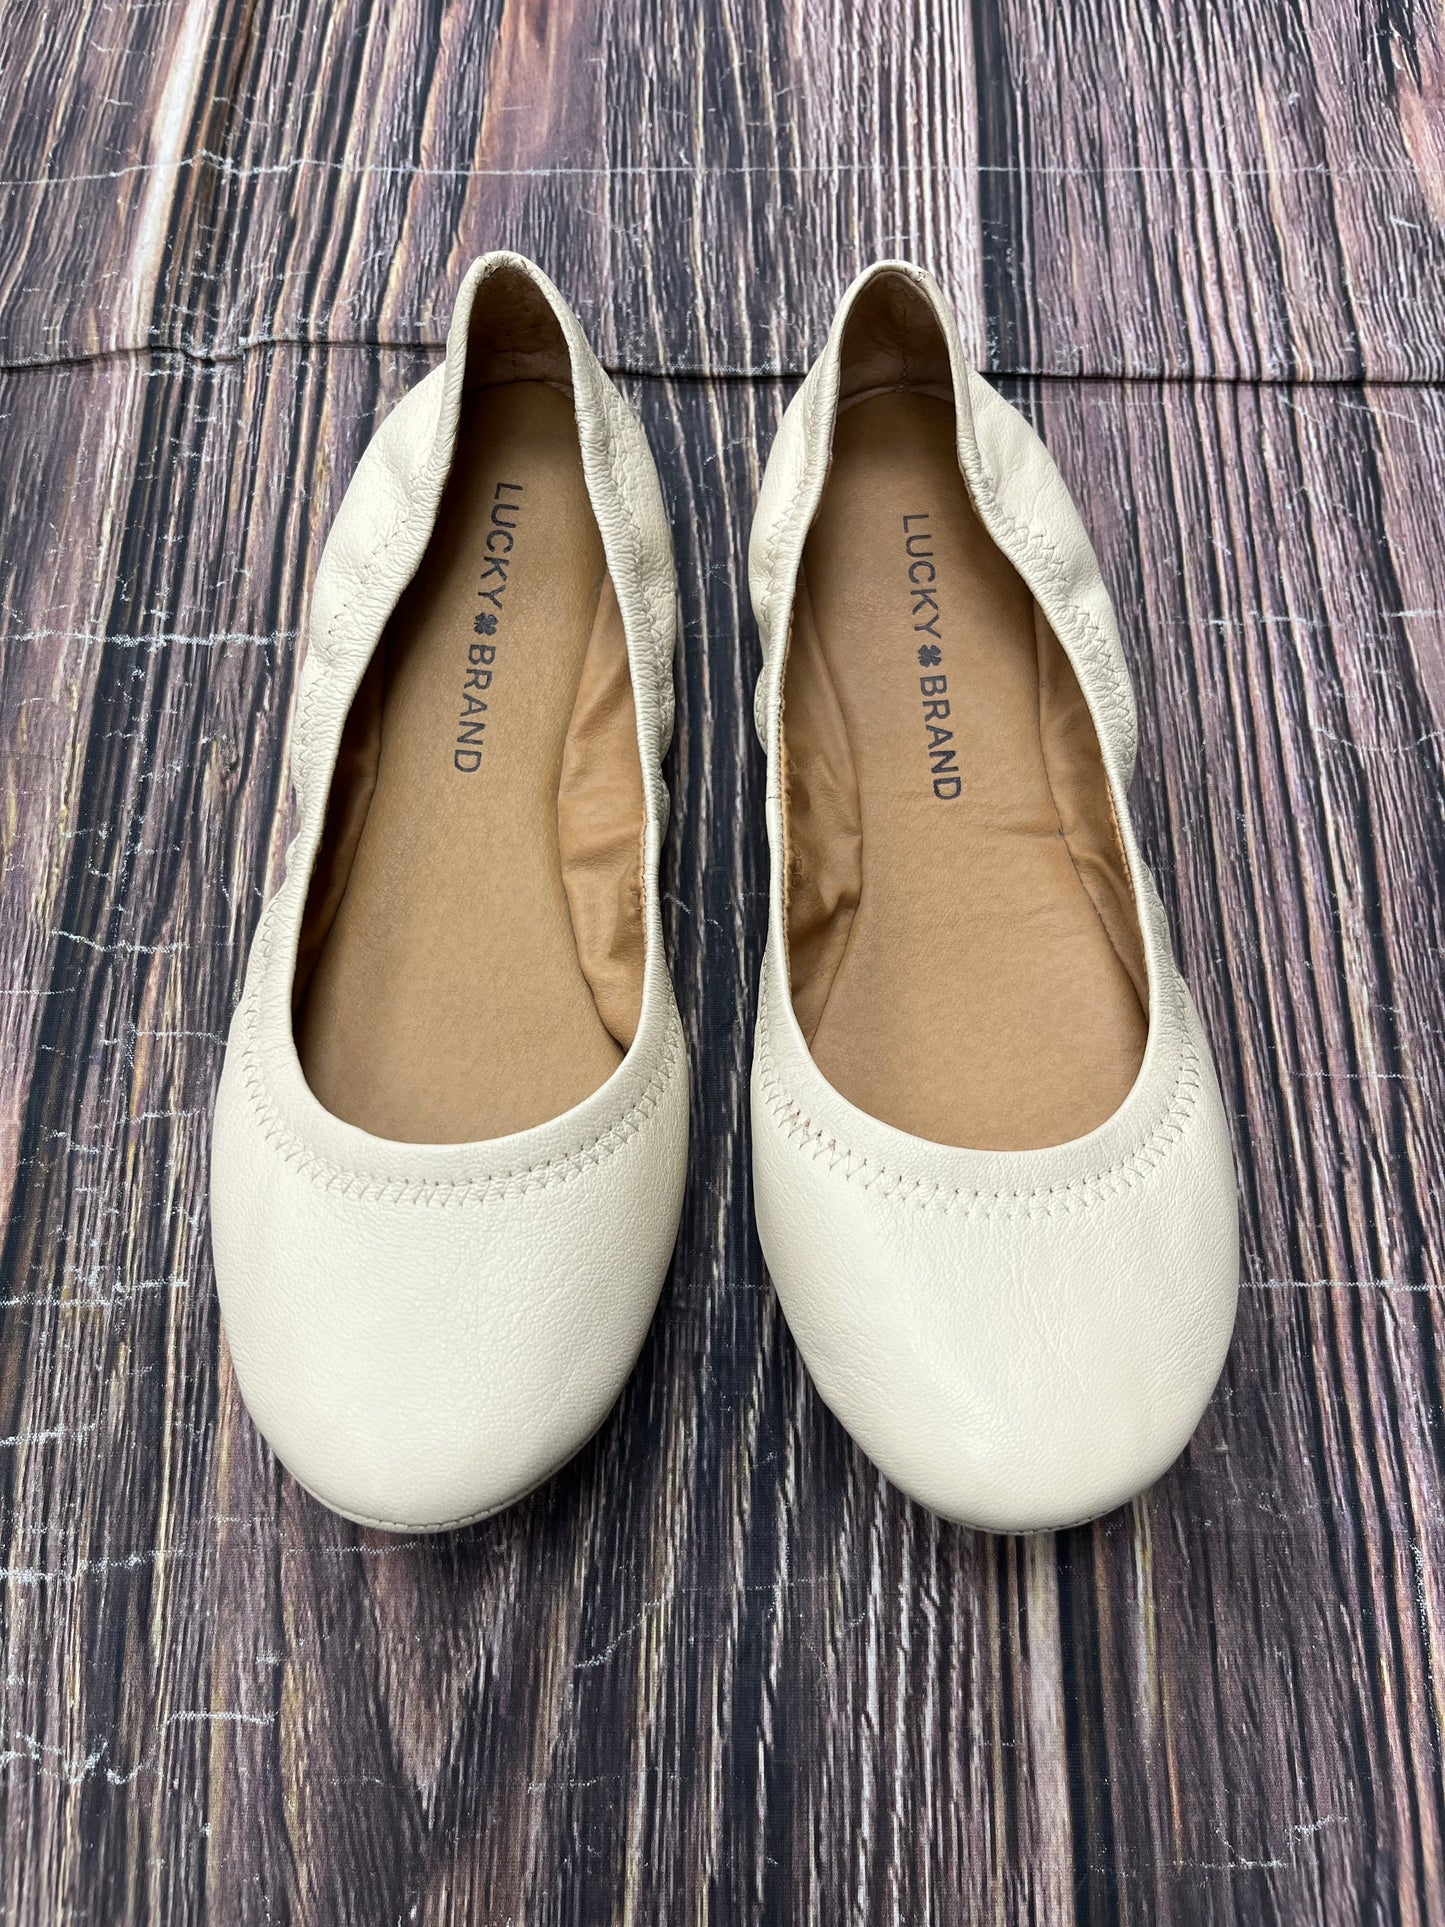 Cream Shoes Flats Lucky Brand, Size 7